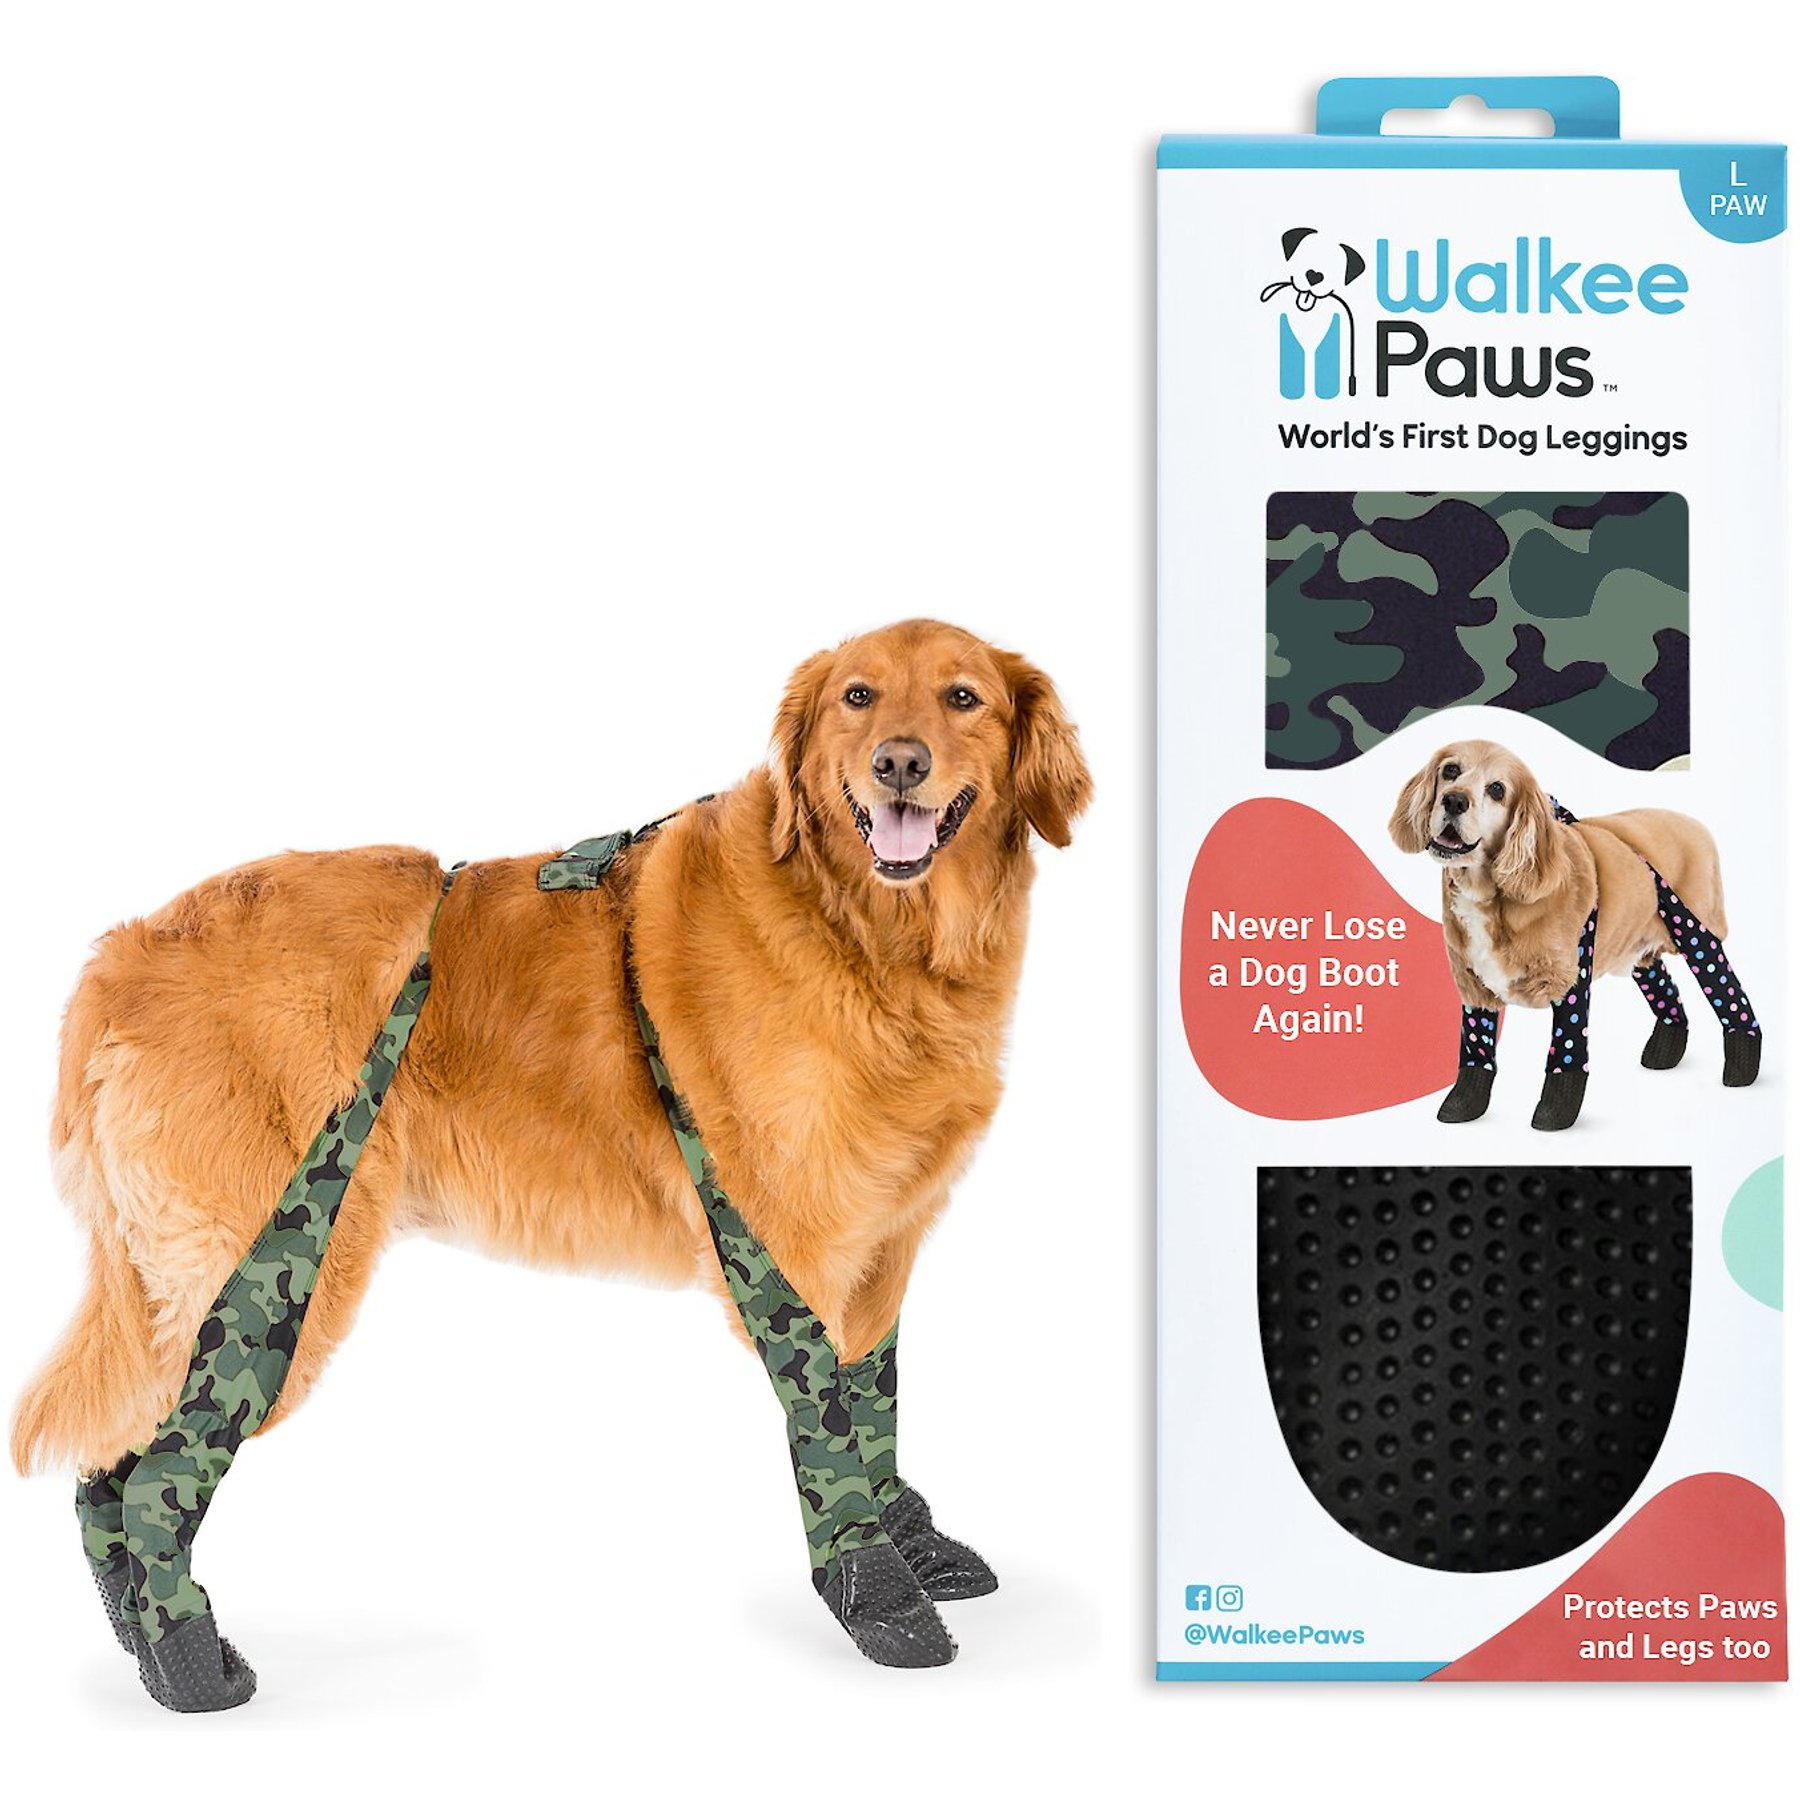 Walkee Paws' Are The First Leggings For Dogs